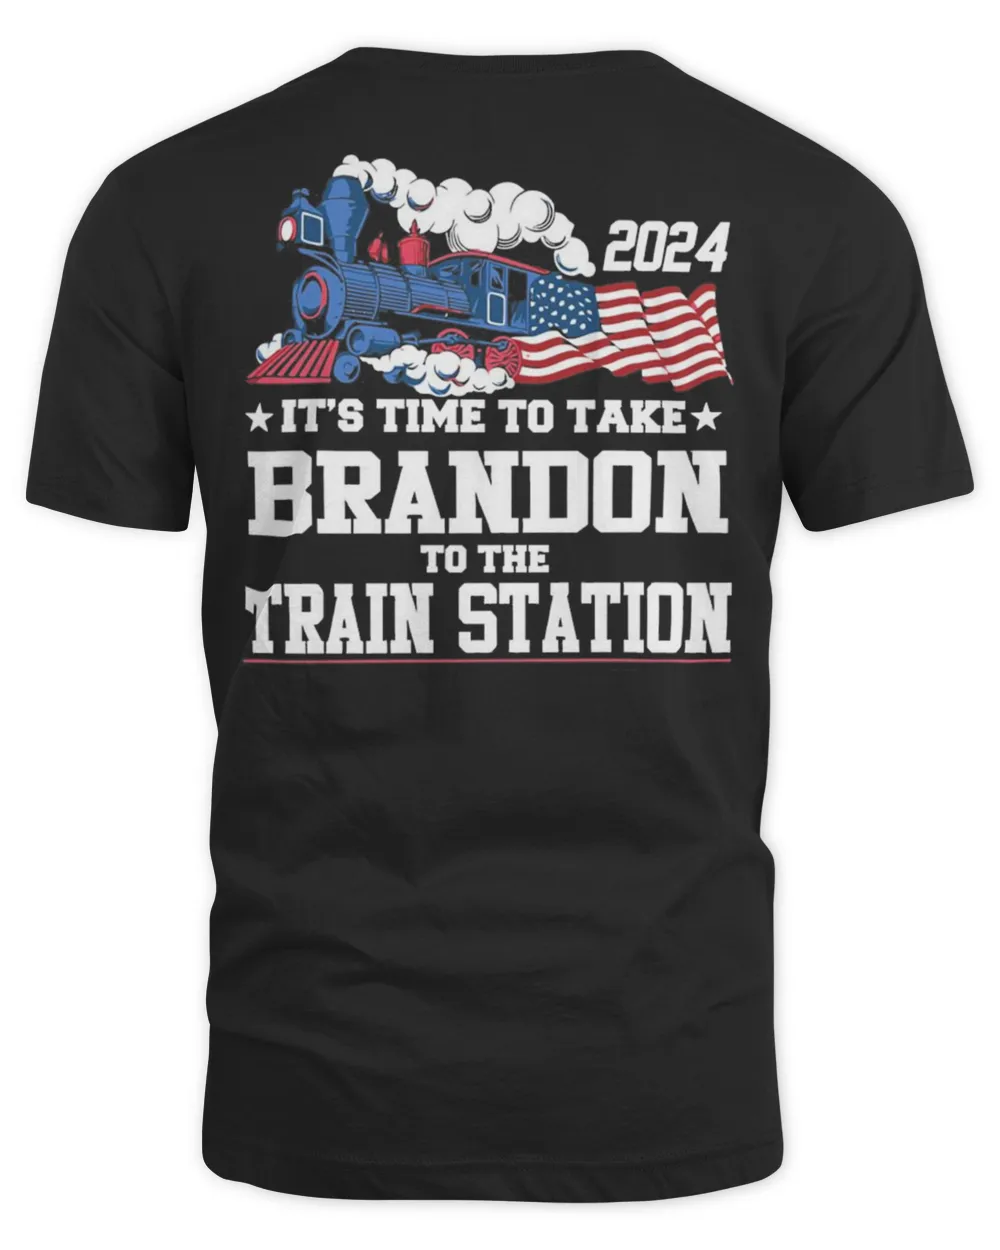 2024 it’s time to take Brandon to the train station Tee shirt